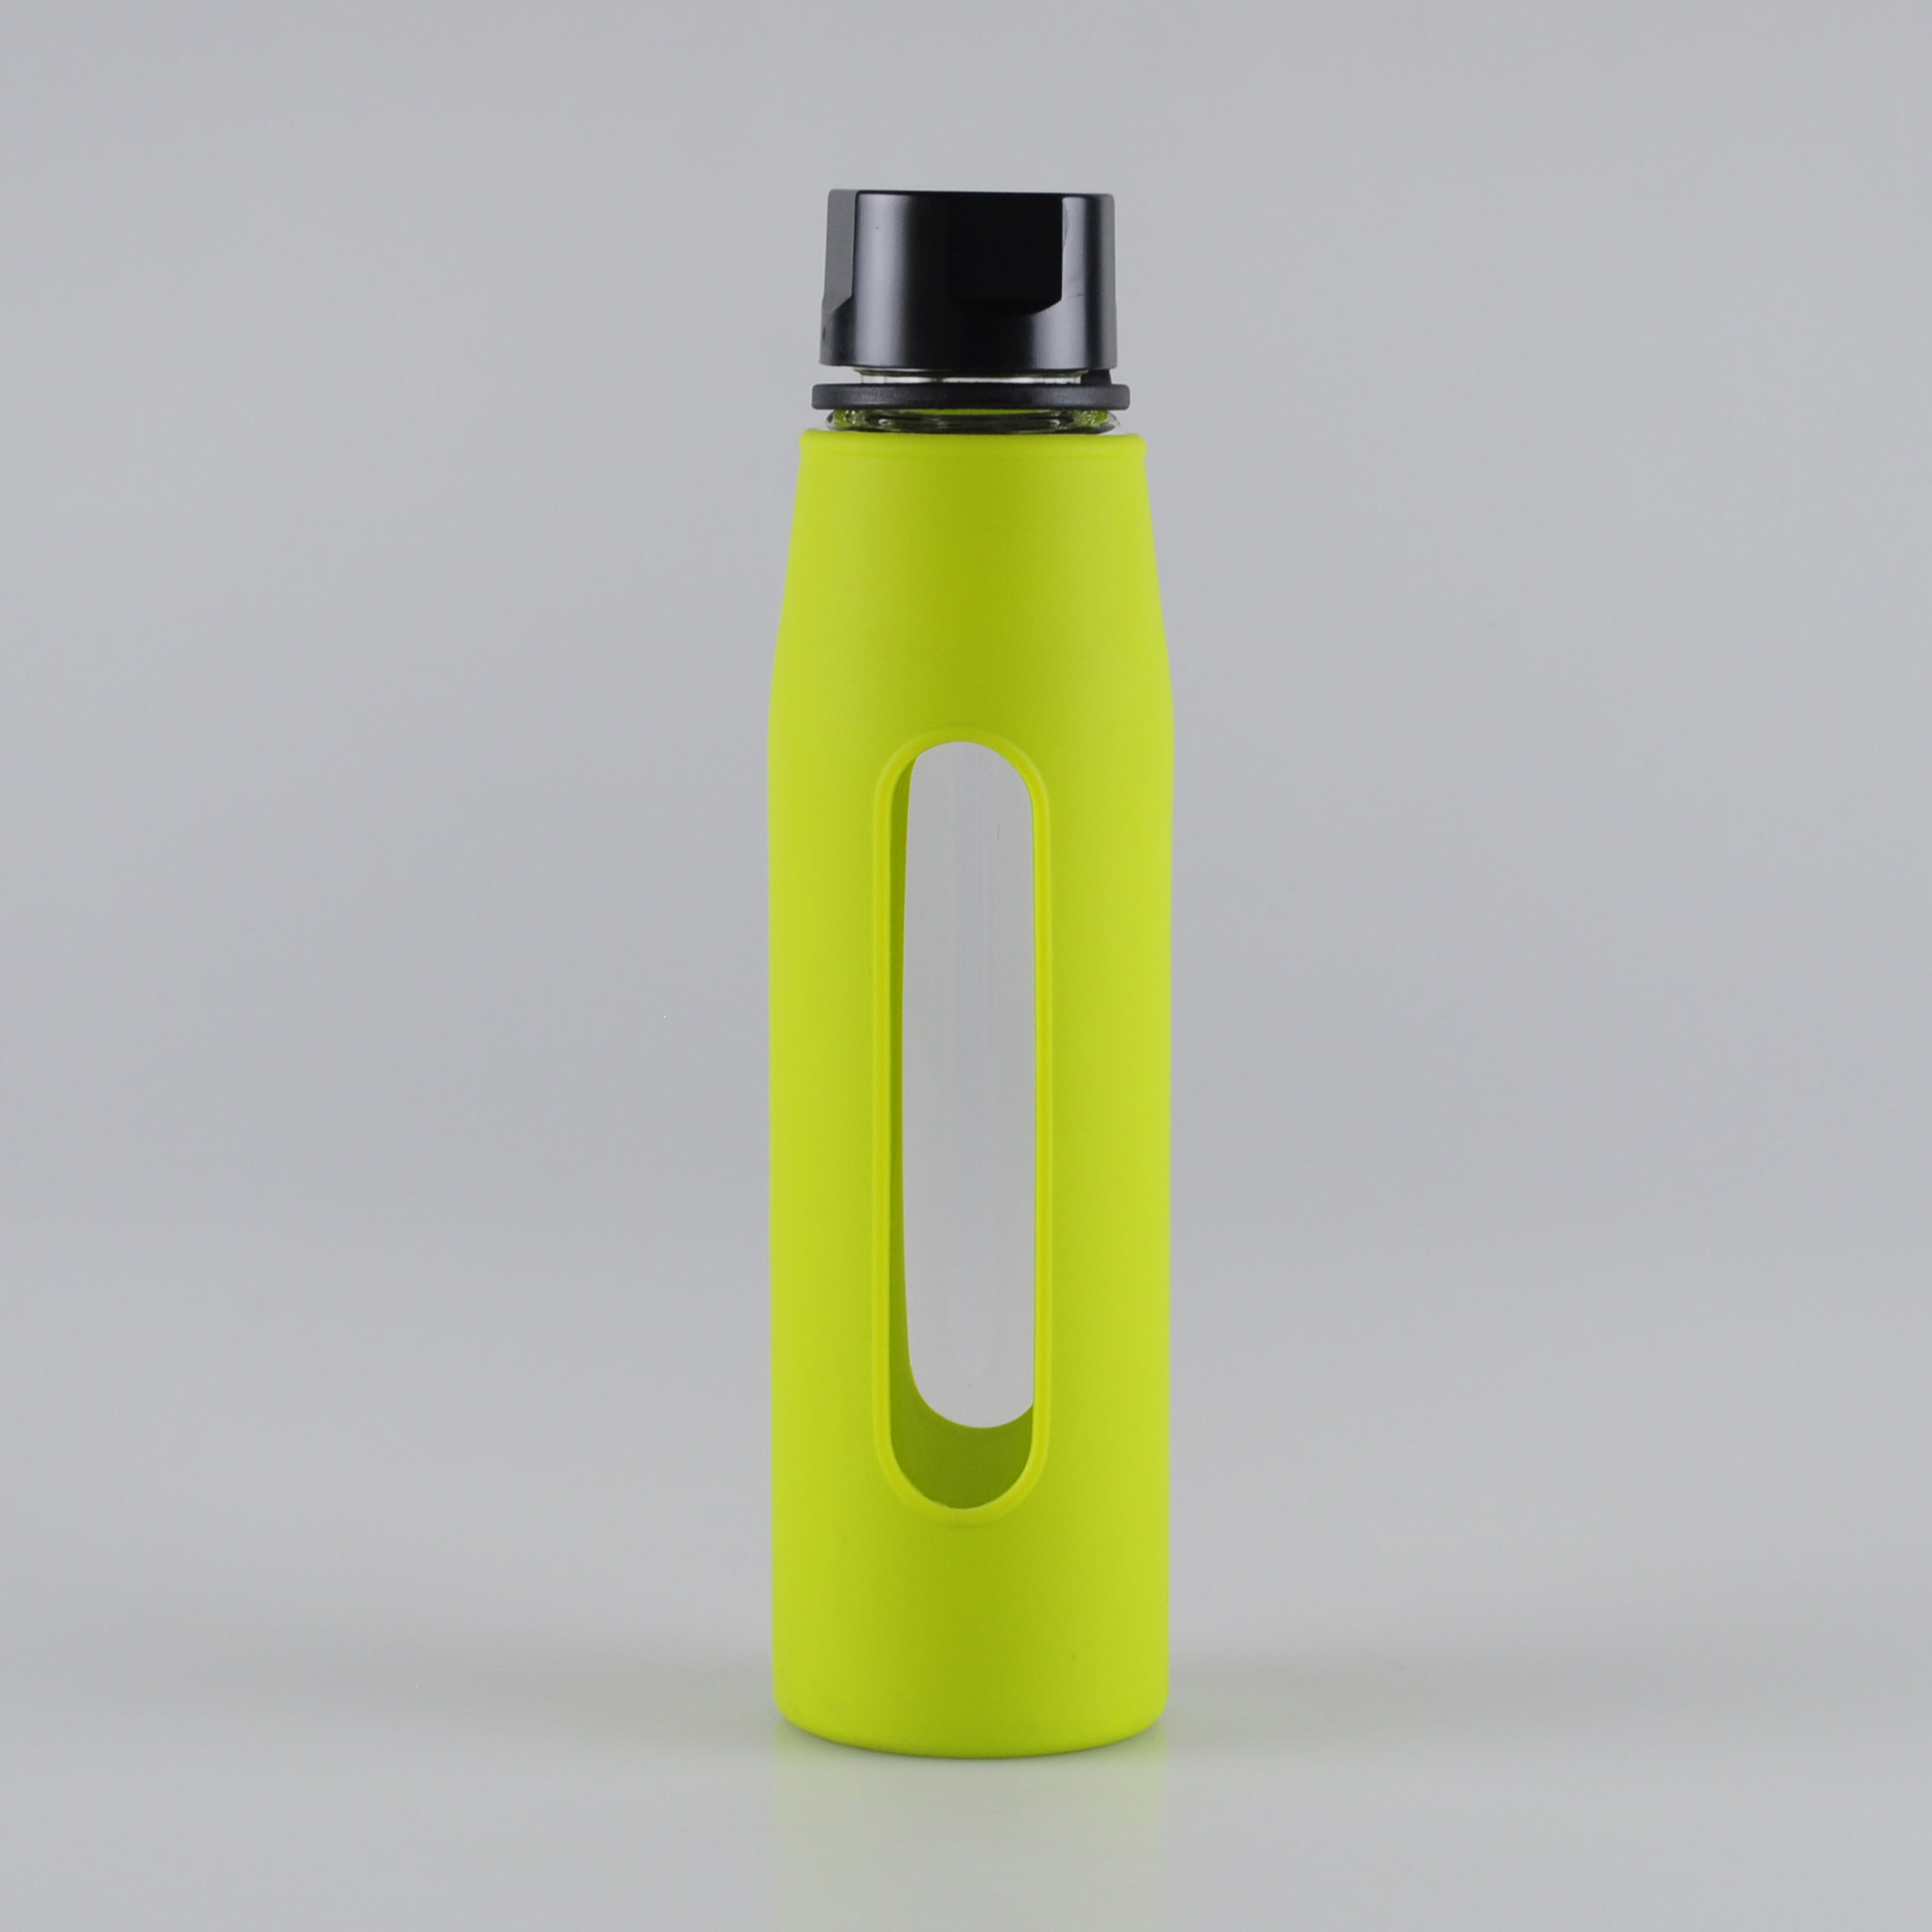 570ml-easy-taking-glass-water-bottle-with-silicone-sleeve (1)